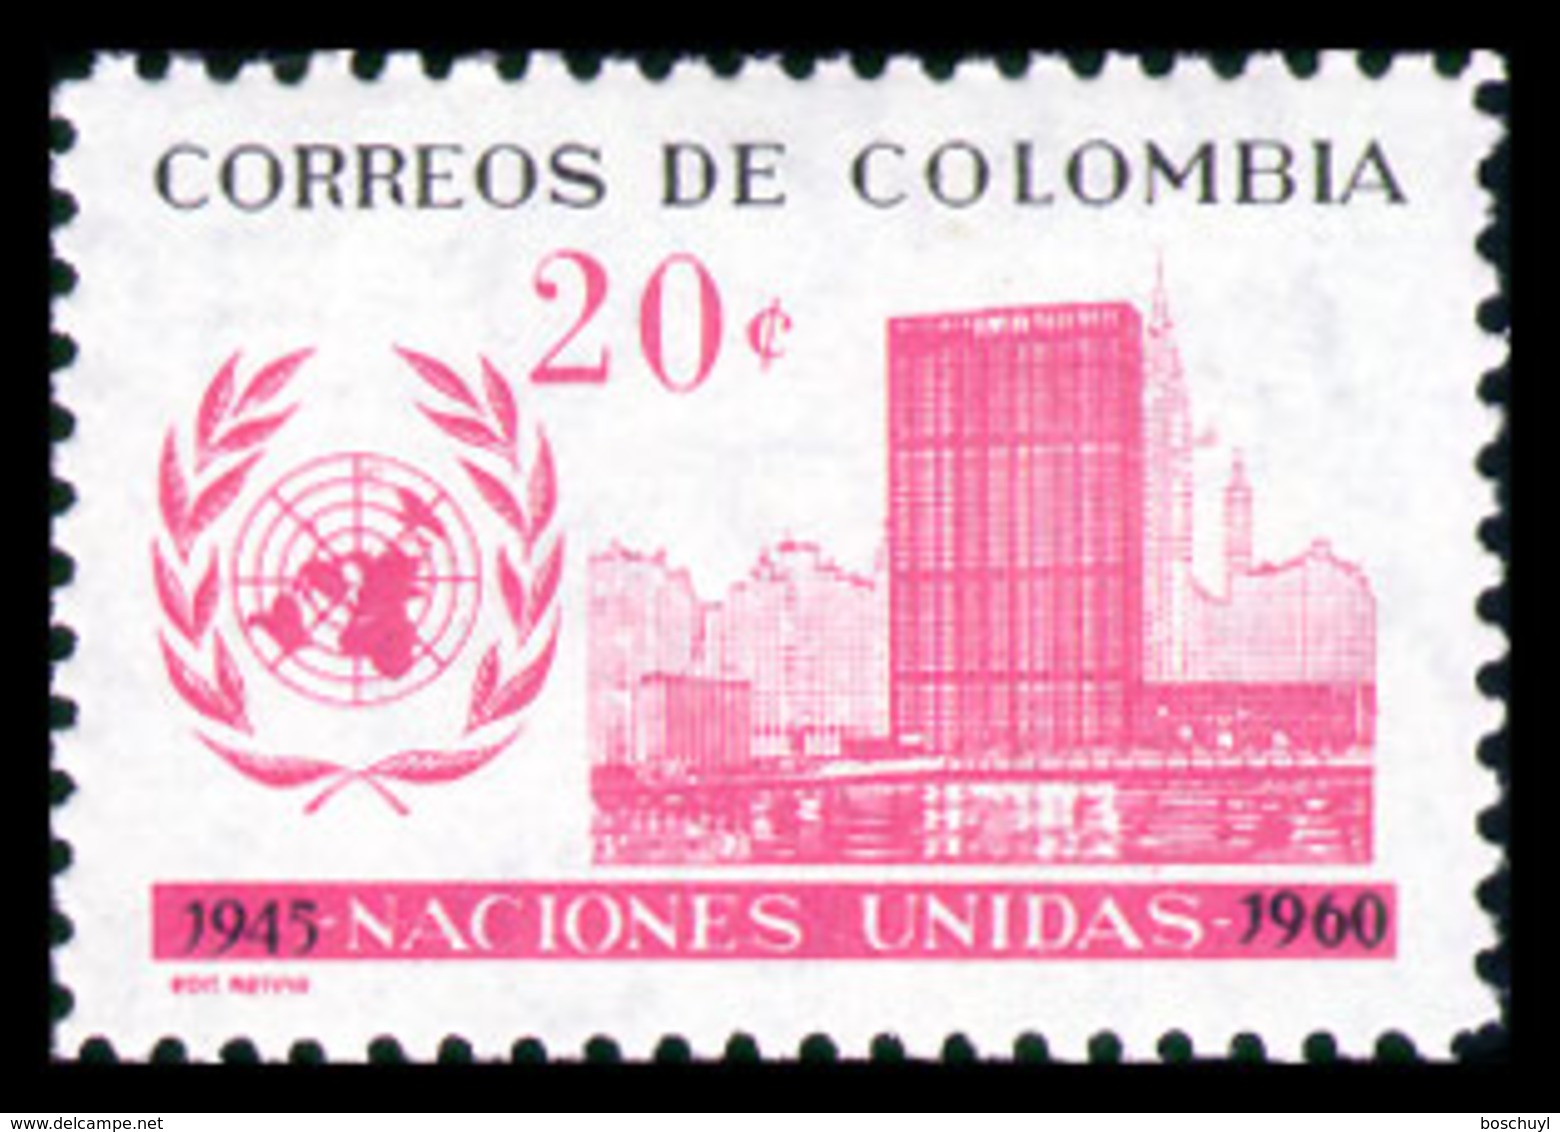 Colombia, 1960, United Nations, 15th Anniversary, MNH, Michel 953 - Colombie